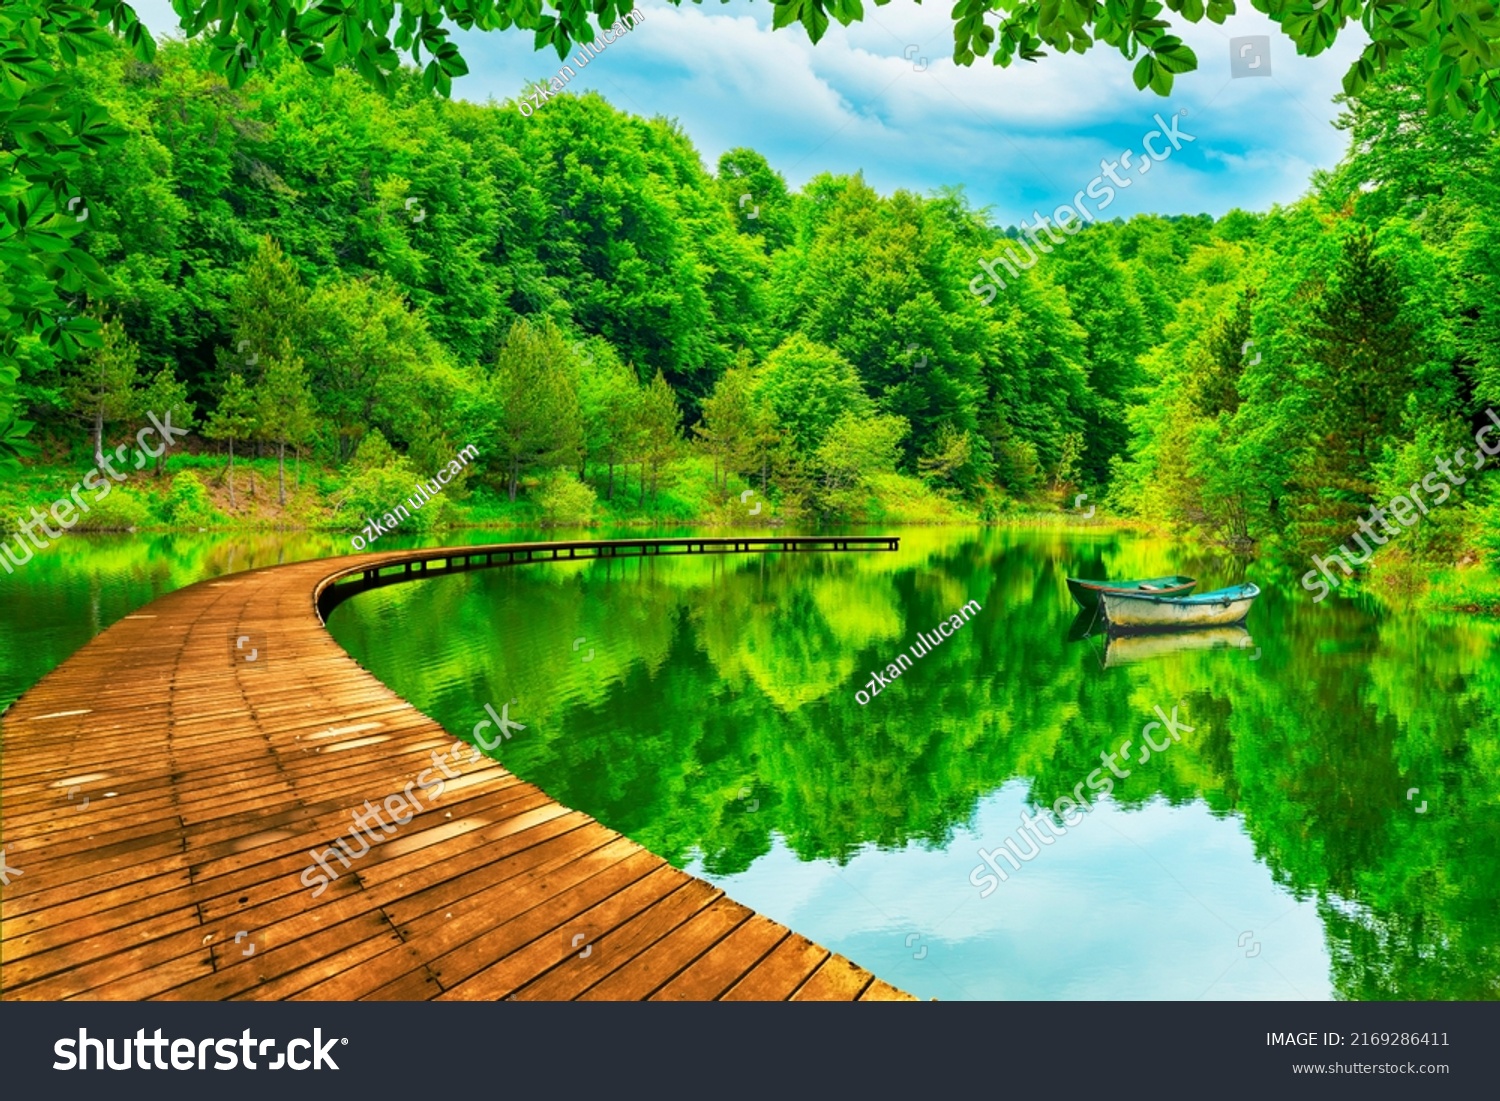 Summer landscape in forest with beautiful lake. view of the lake in the forest. green lake landscape in nature of europe. nature scenery background theme. Nature travel in the forests of Europe. #2169286411